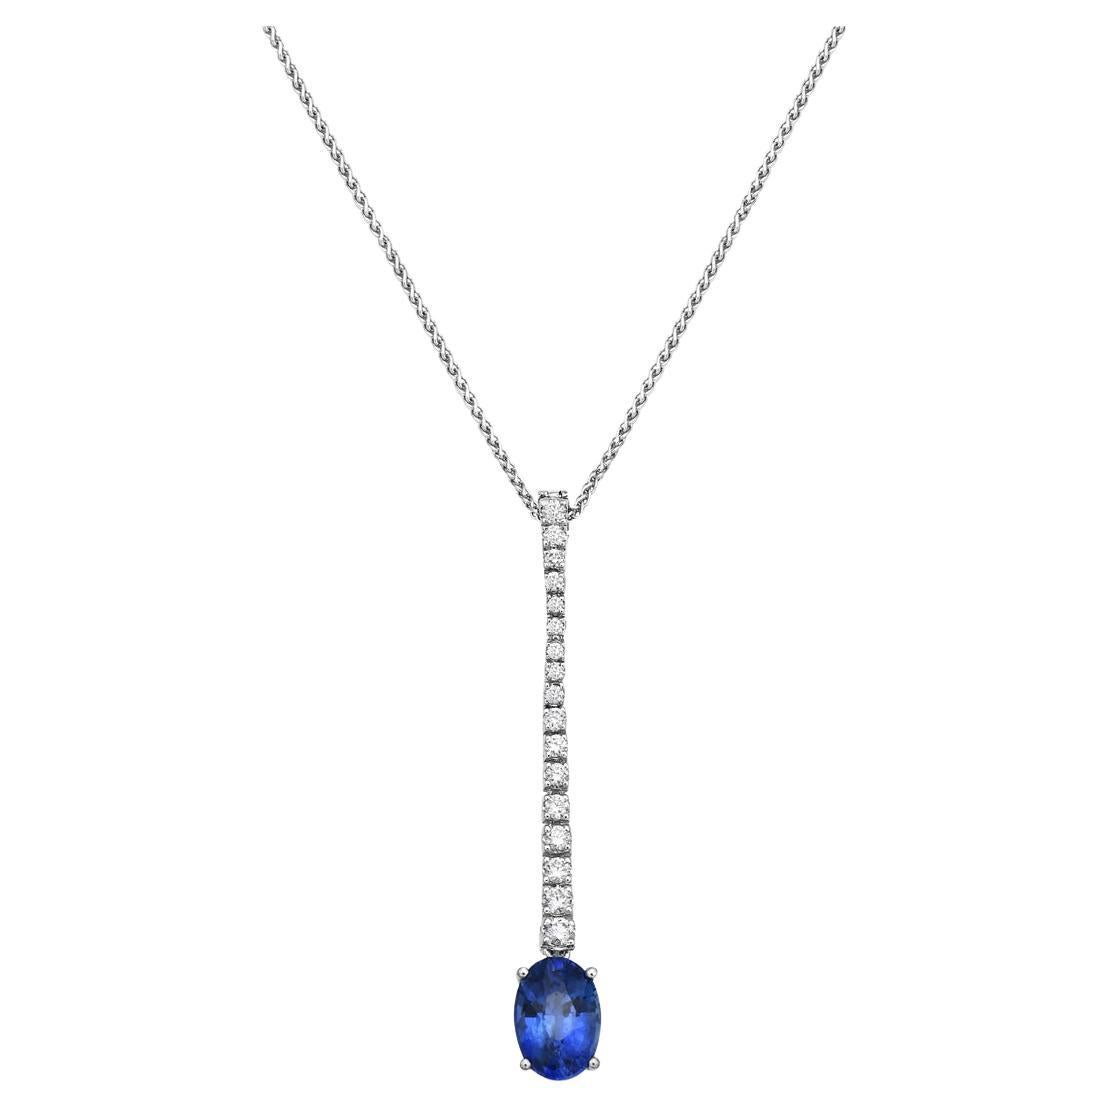 Oval Shaped Sapphire and Diamond Necklace